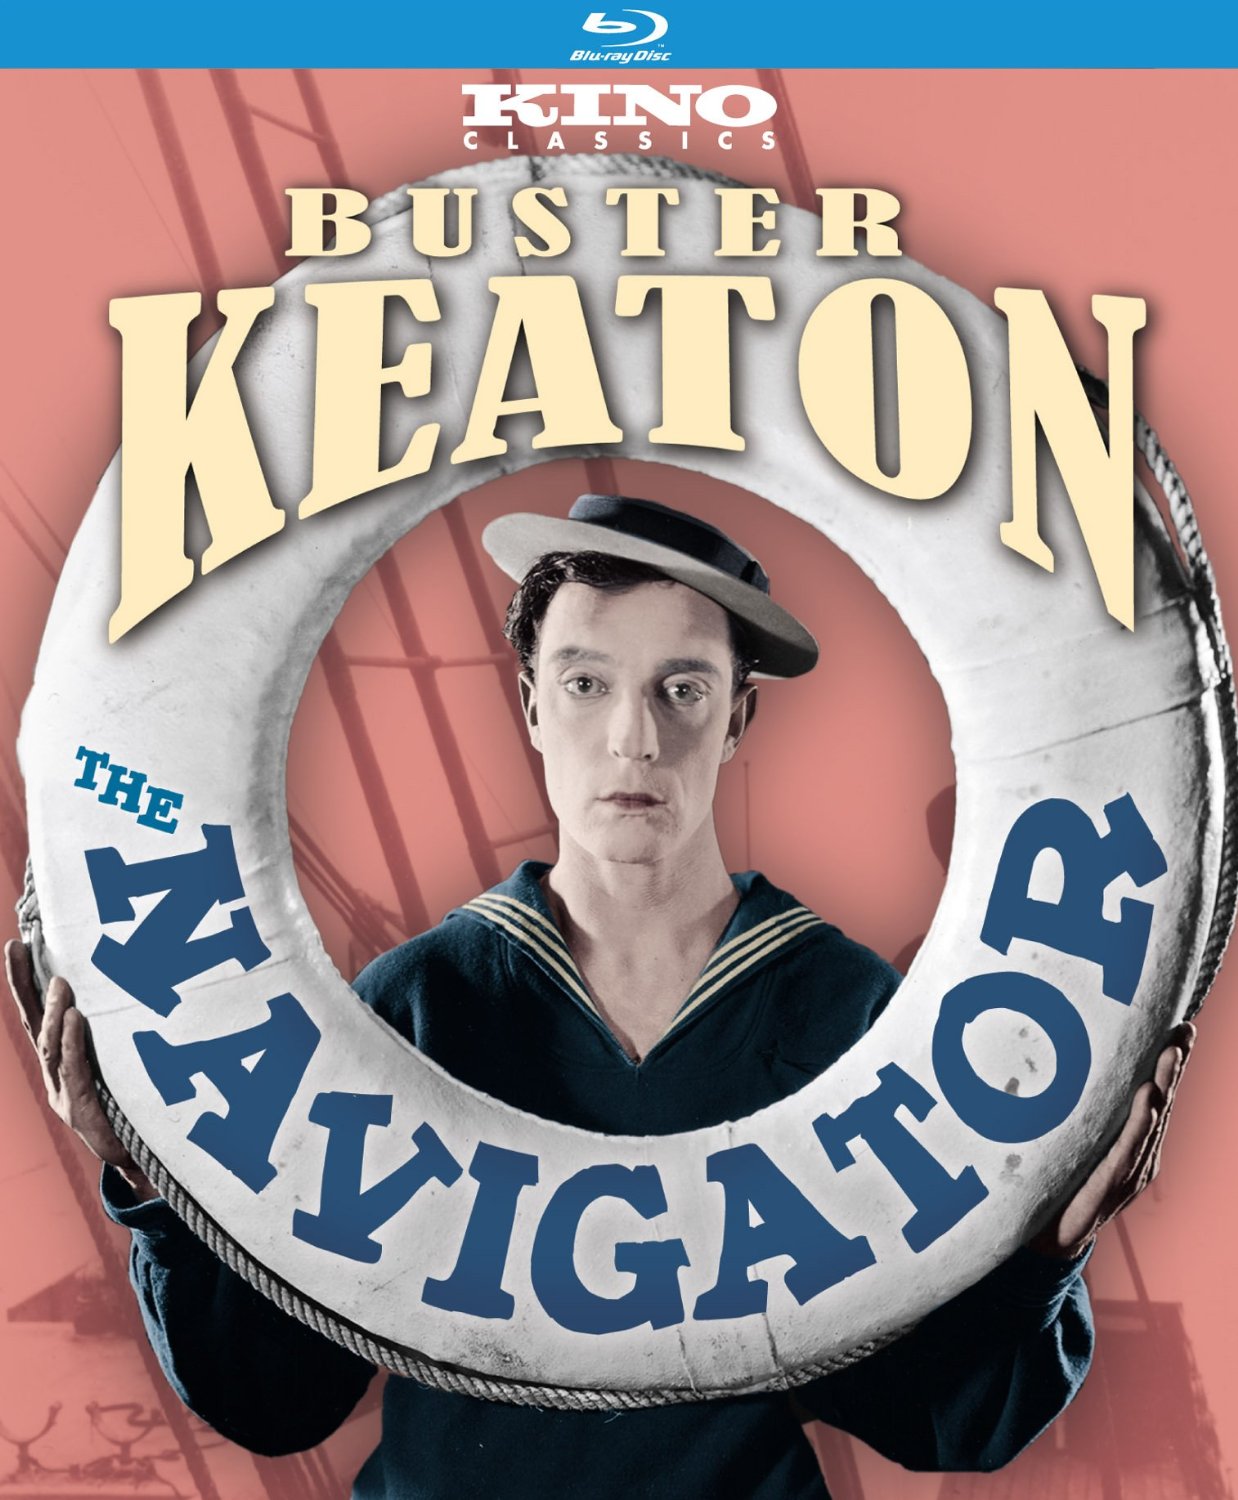 The Navigator, starring Buster Keaton and Kathryn McGuire